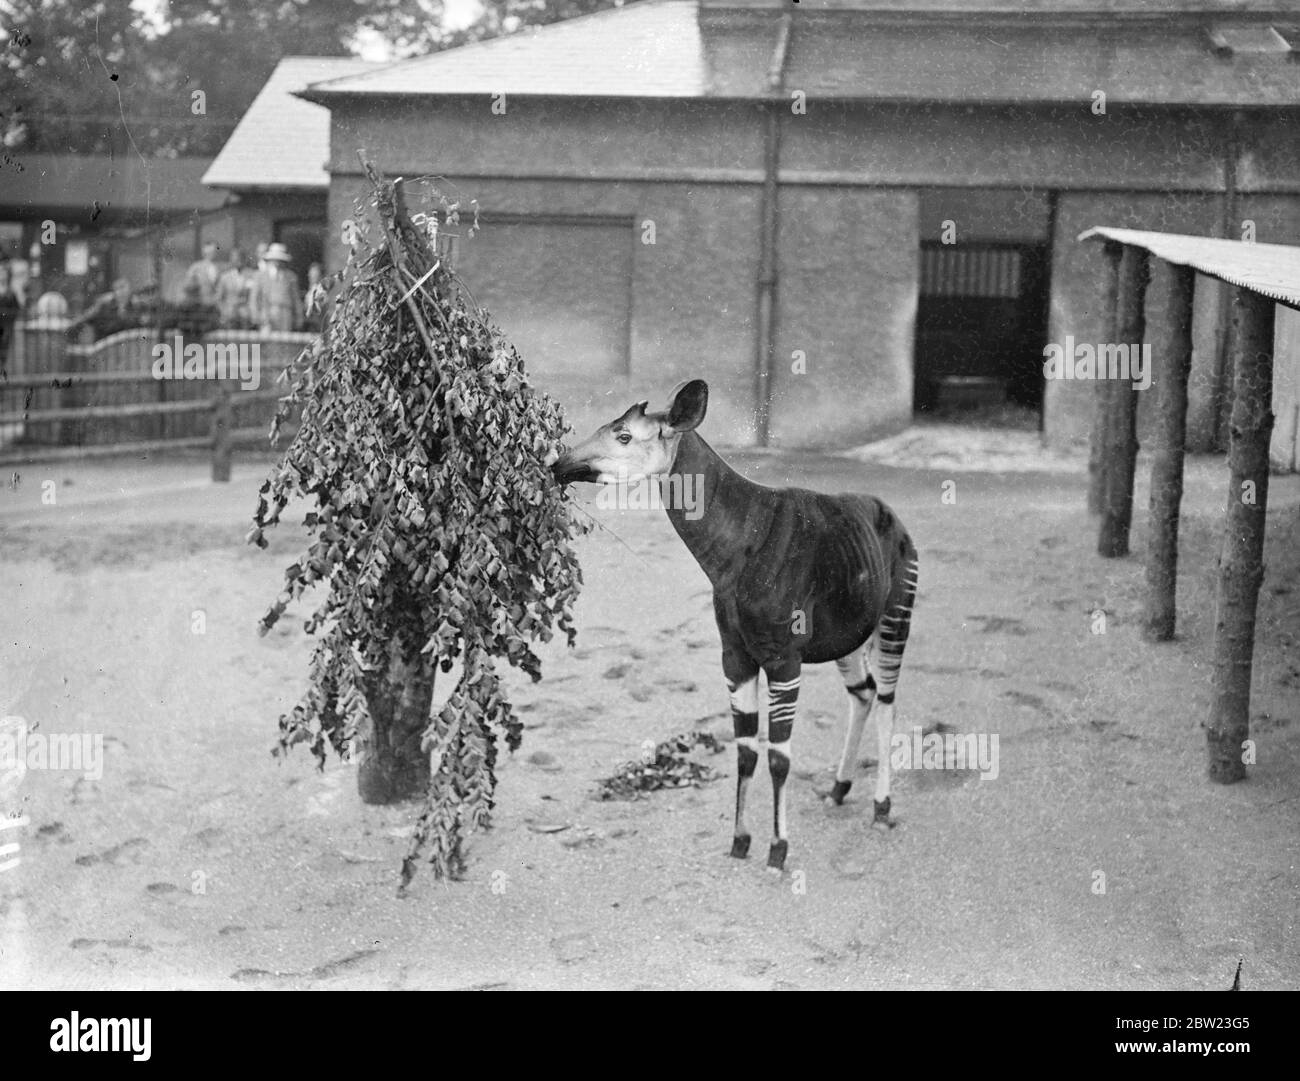 The London Zoo's new okapi , which was presented by the King , who received it from King Leopold of the Belgians, from the Belgian Congo. He arrived at his new home and tucked into a hearty meal . 21 July 1937 Stock Photo